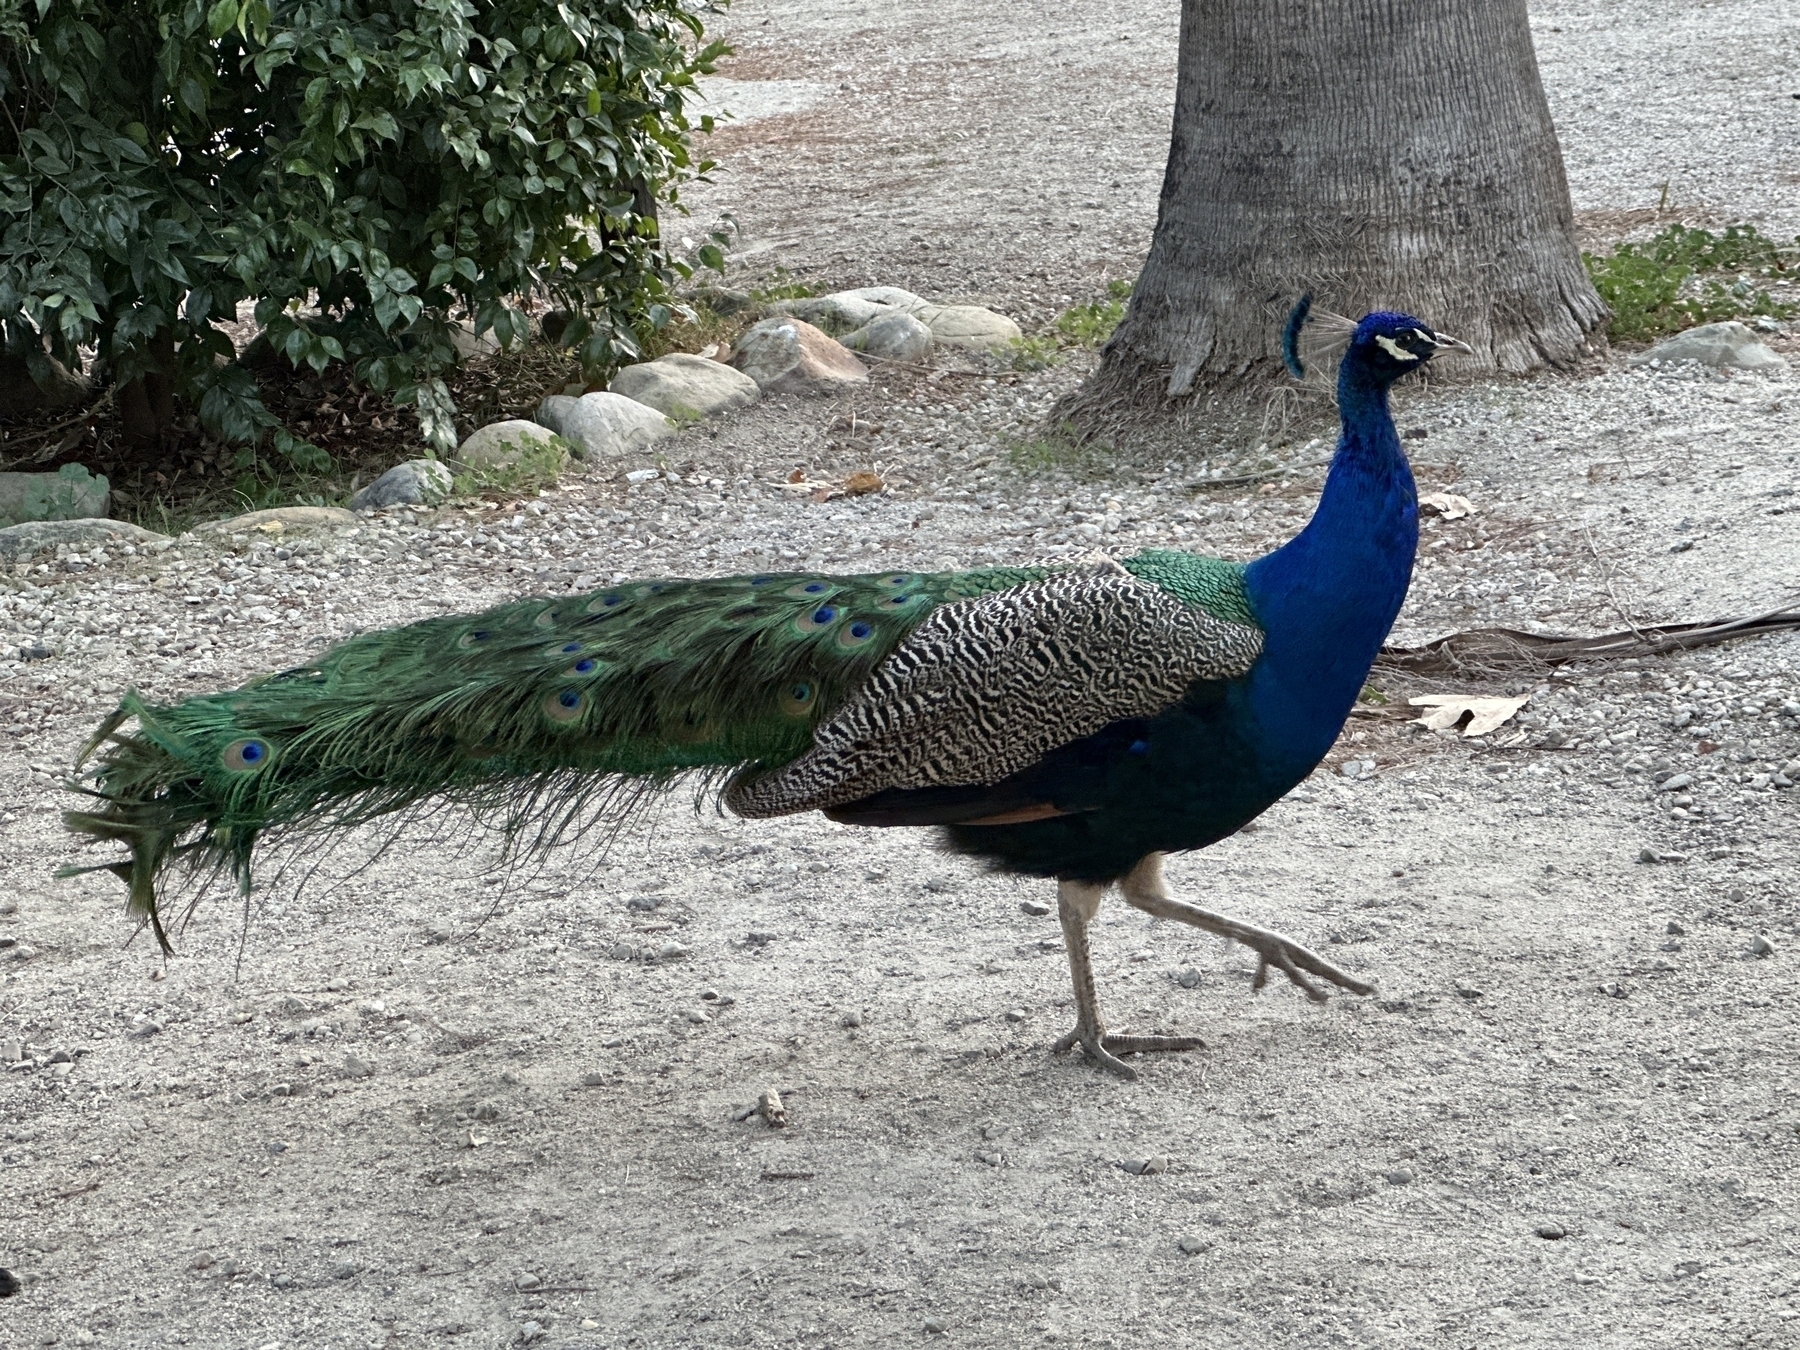 Peacock roaming our campsite.